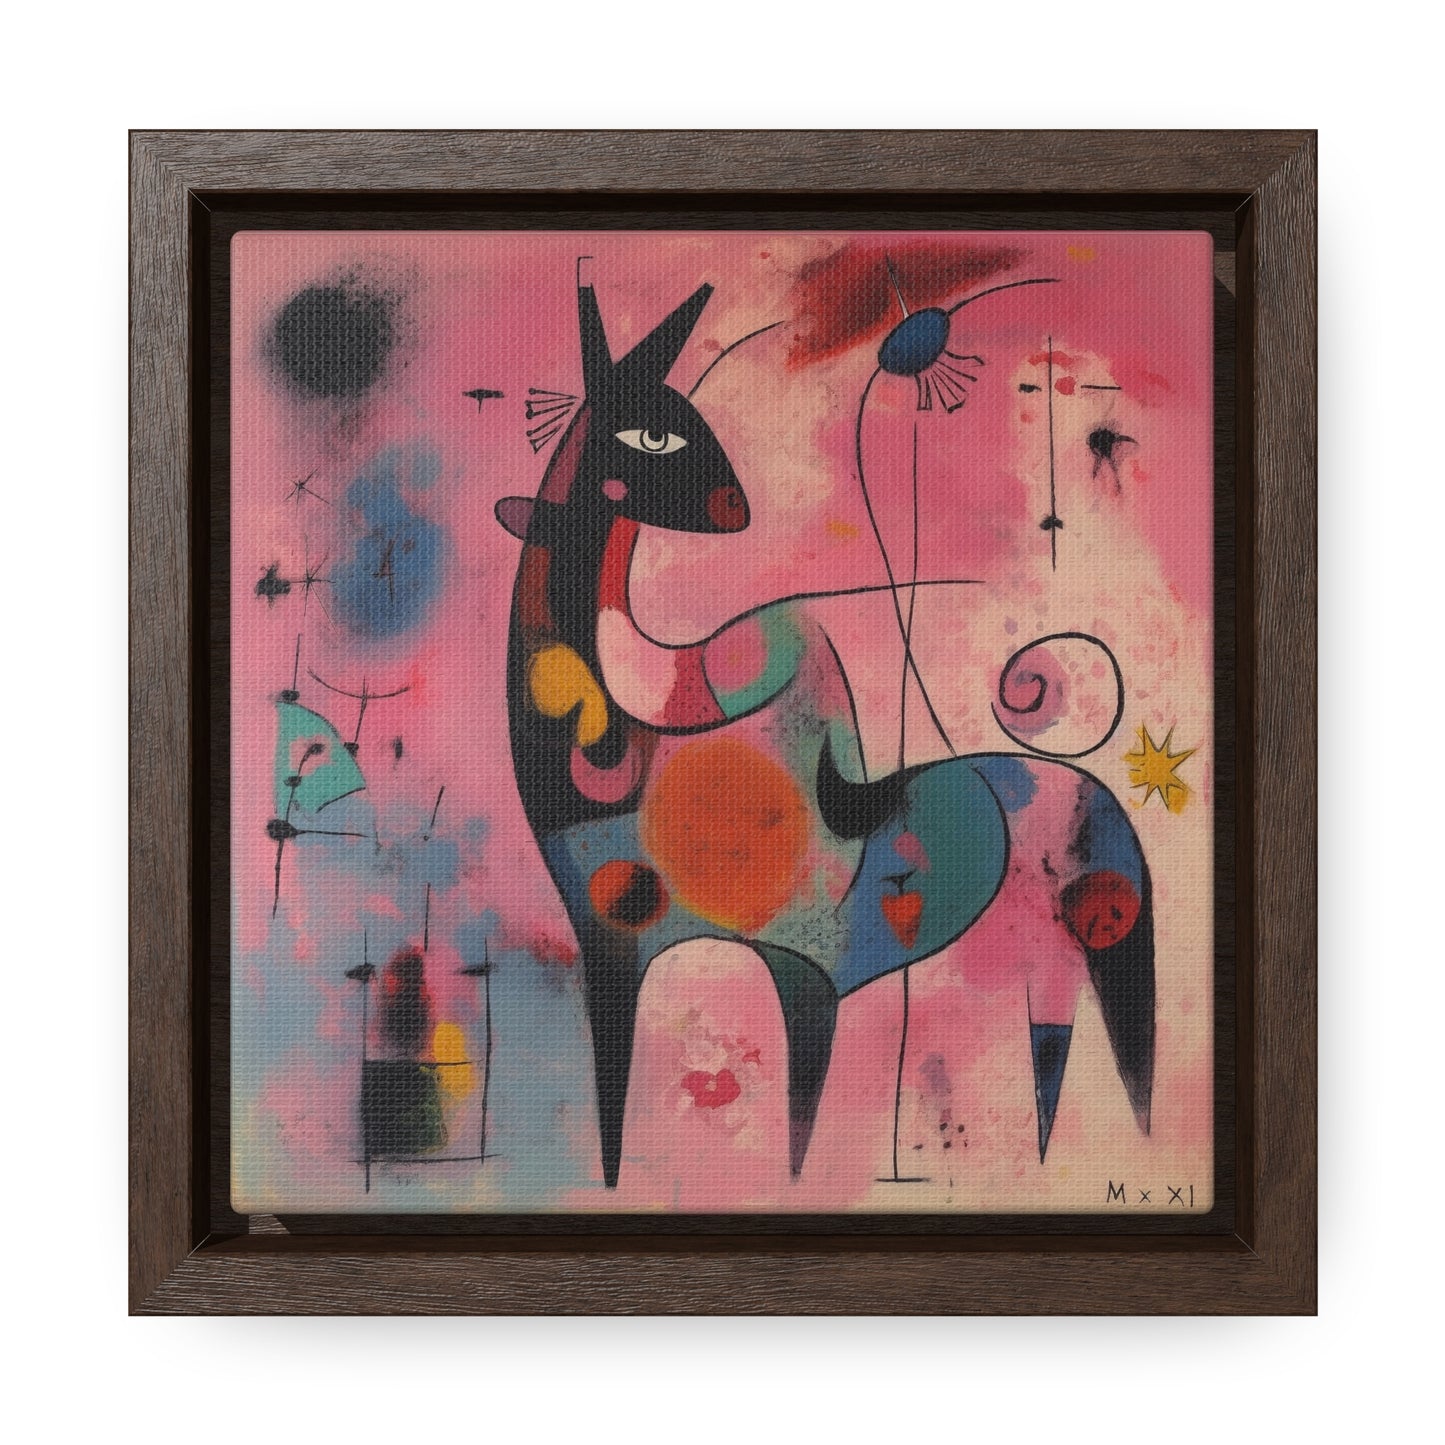 The Dreams of the Child 35, Gallery Canvas Wraps, Square Frame